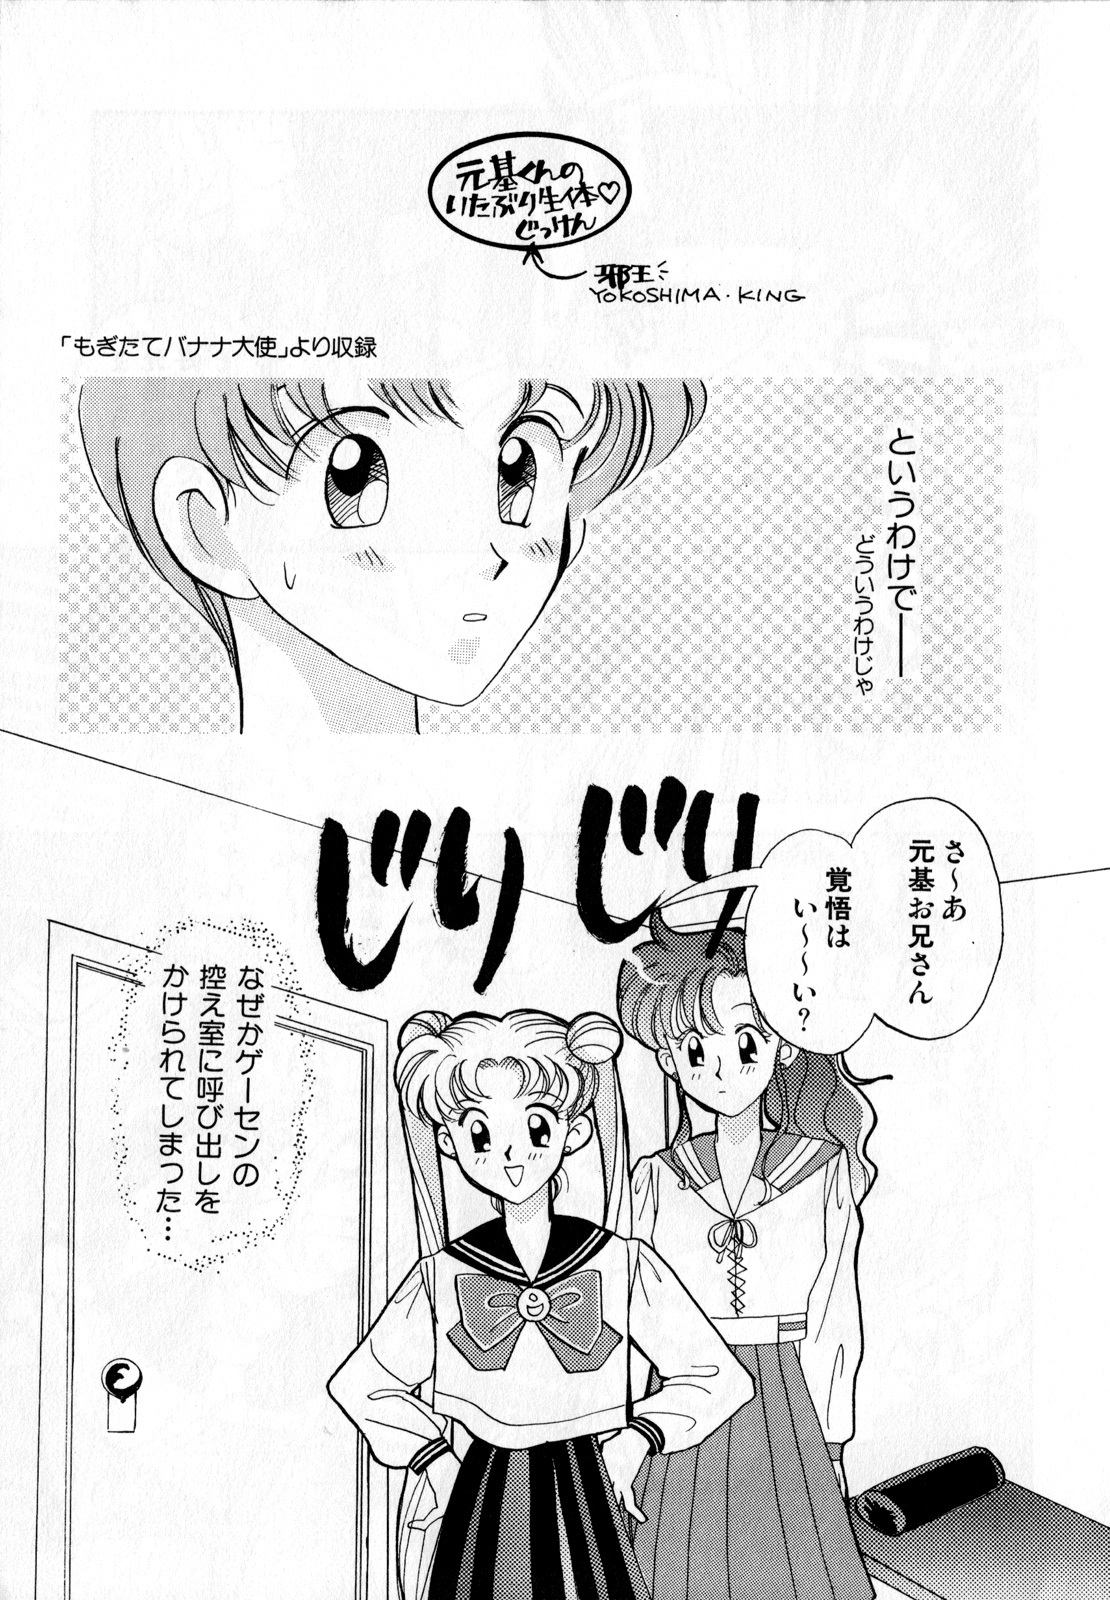 [Anthology] Lunatic Party 2 (Sailor Moon) page 14 full